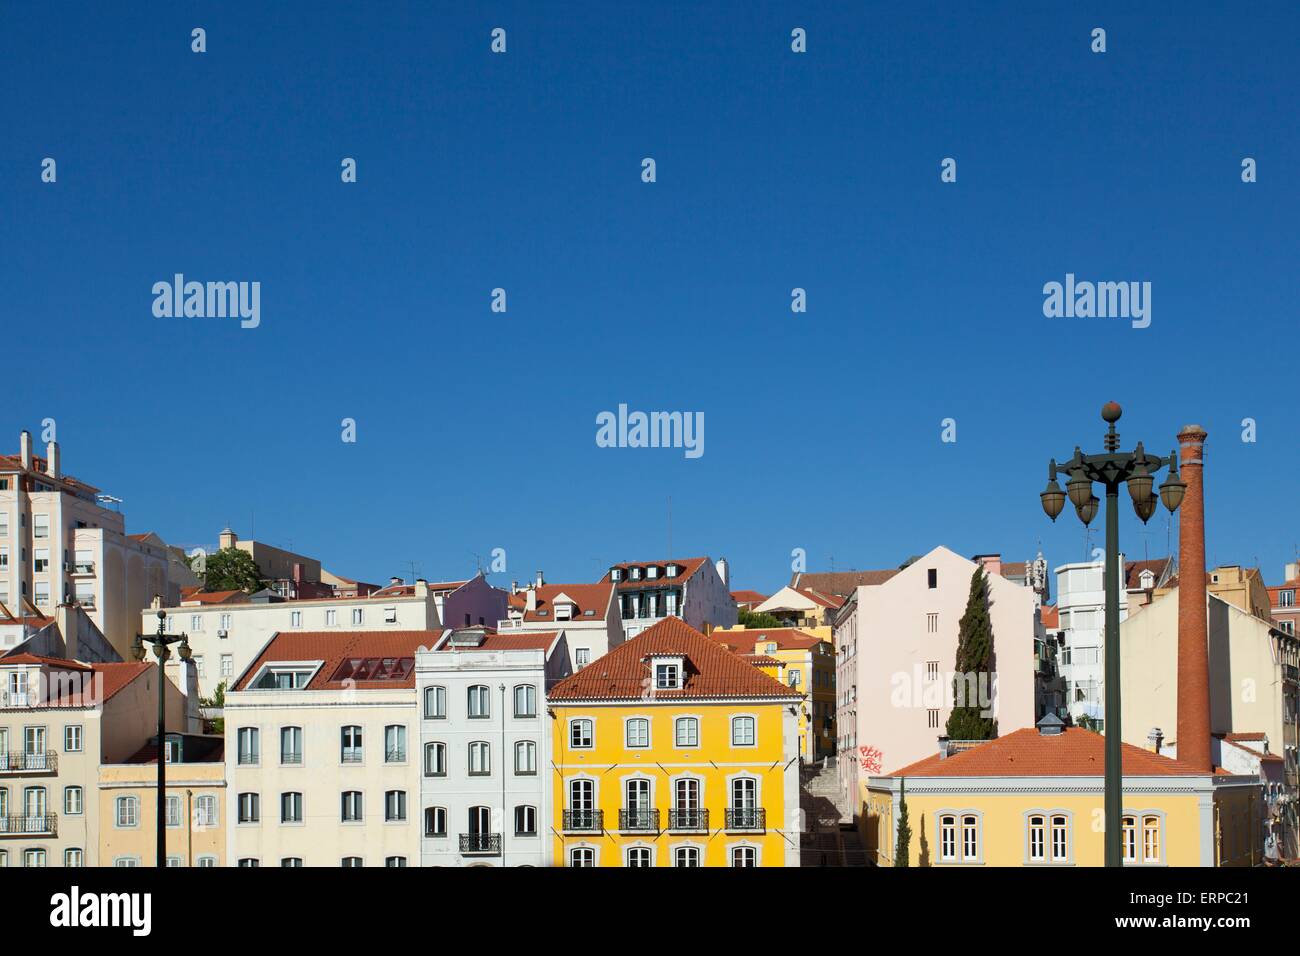 Colourful pombaline style buildings in Lisbon against a bright blue sky in summer Stock Photo